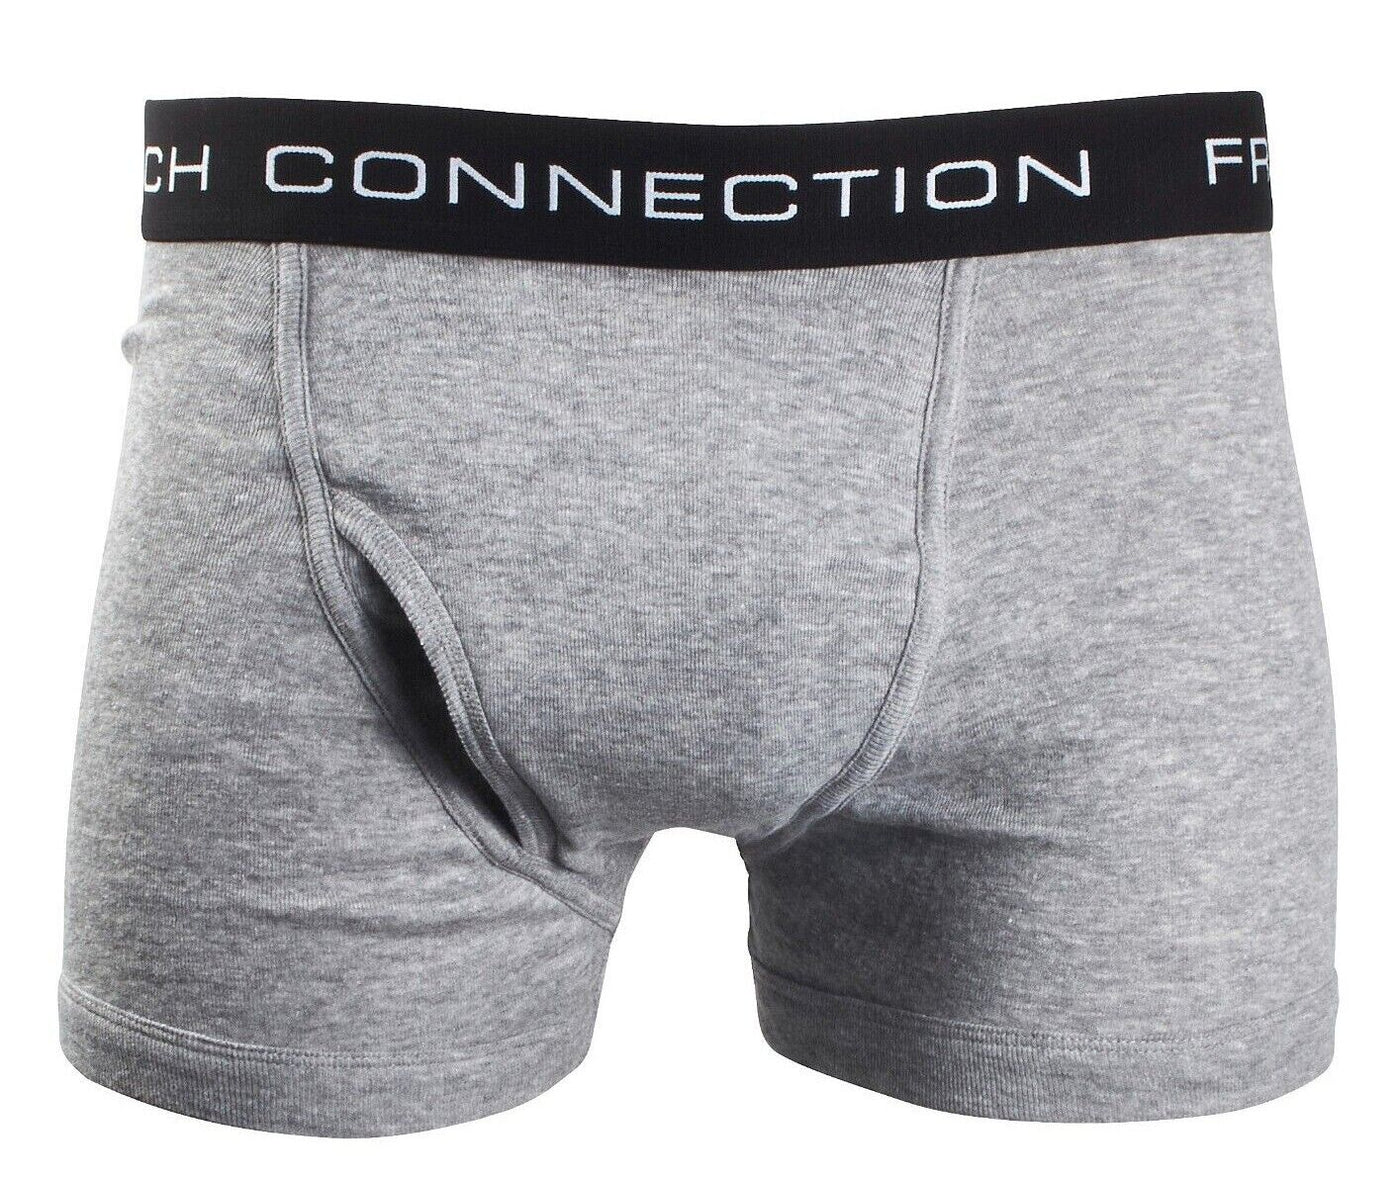 French Connection Men's White & HTH Grey 2 Pack Boxer Briefs